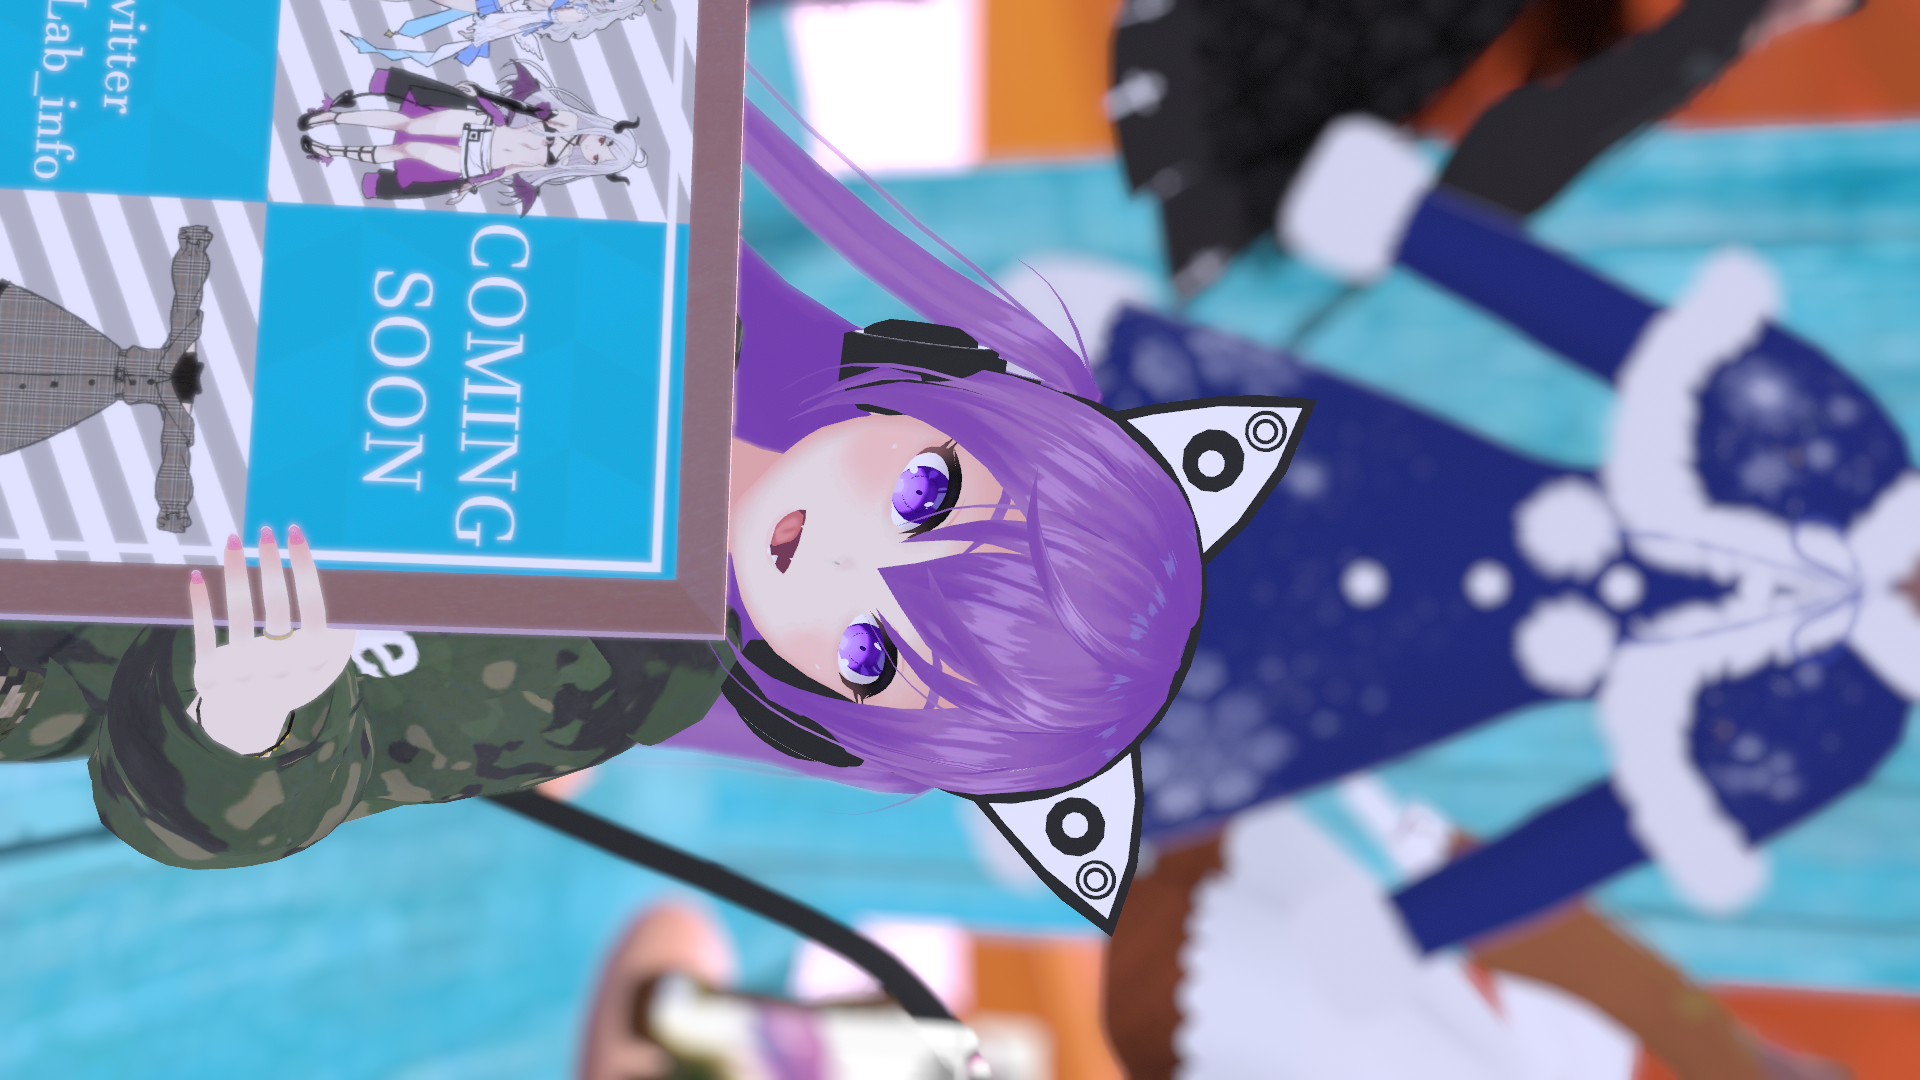 VRChat_1920x1080_2021-12-05_05-09-37.950.png